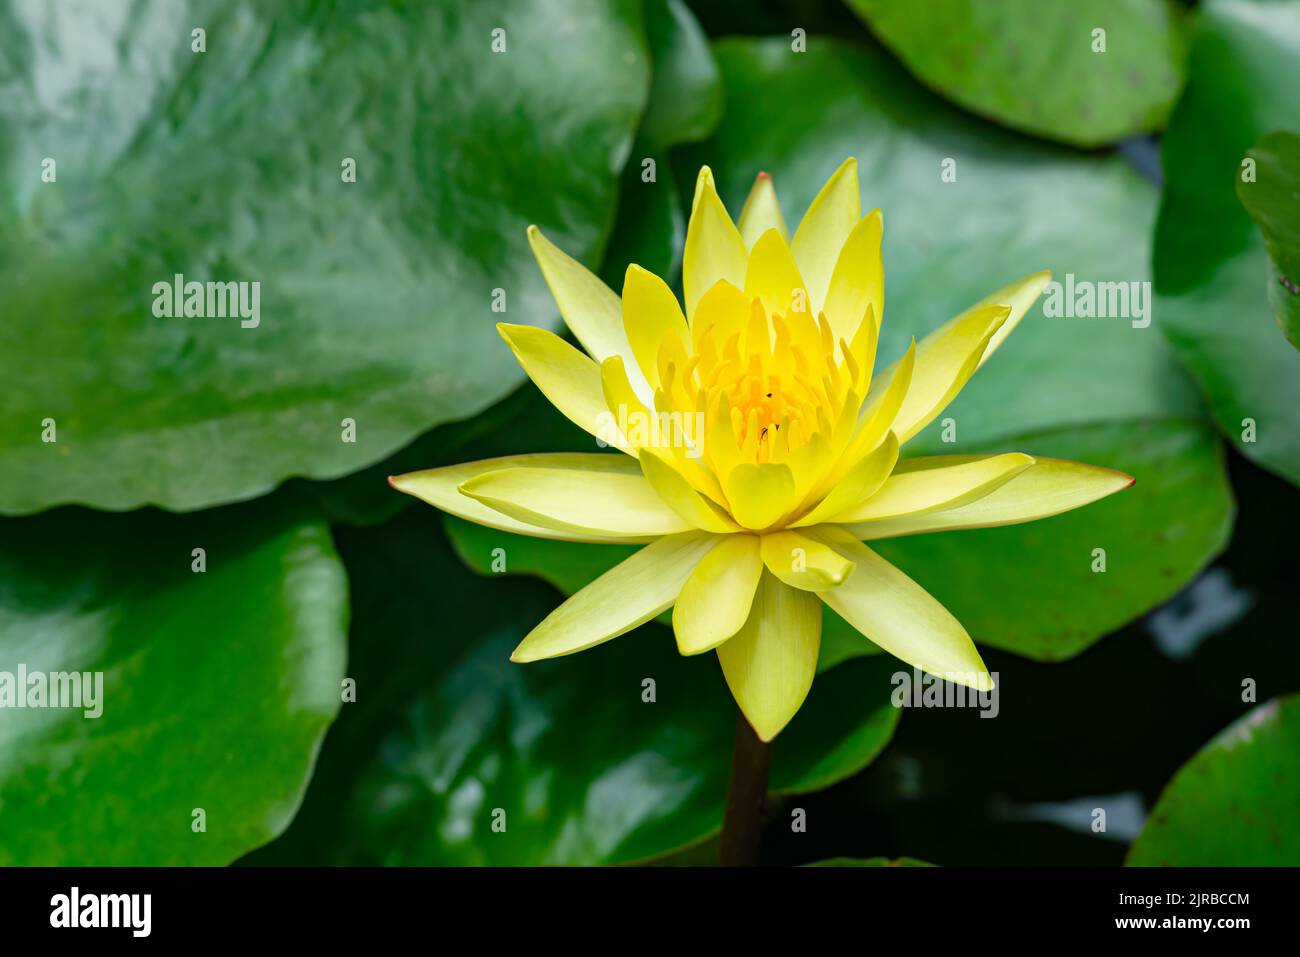 Beautiful yellow lotus flower or waterlily blooming in a pond with green leaves in the background. Stock Photo